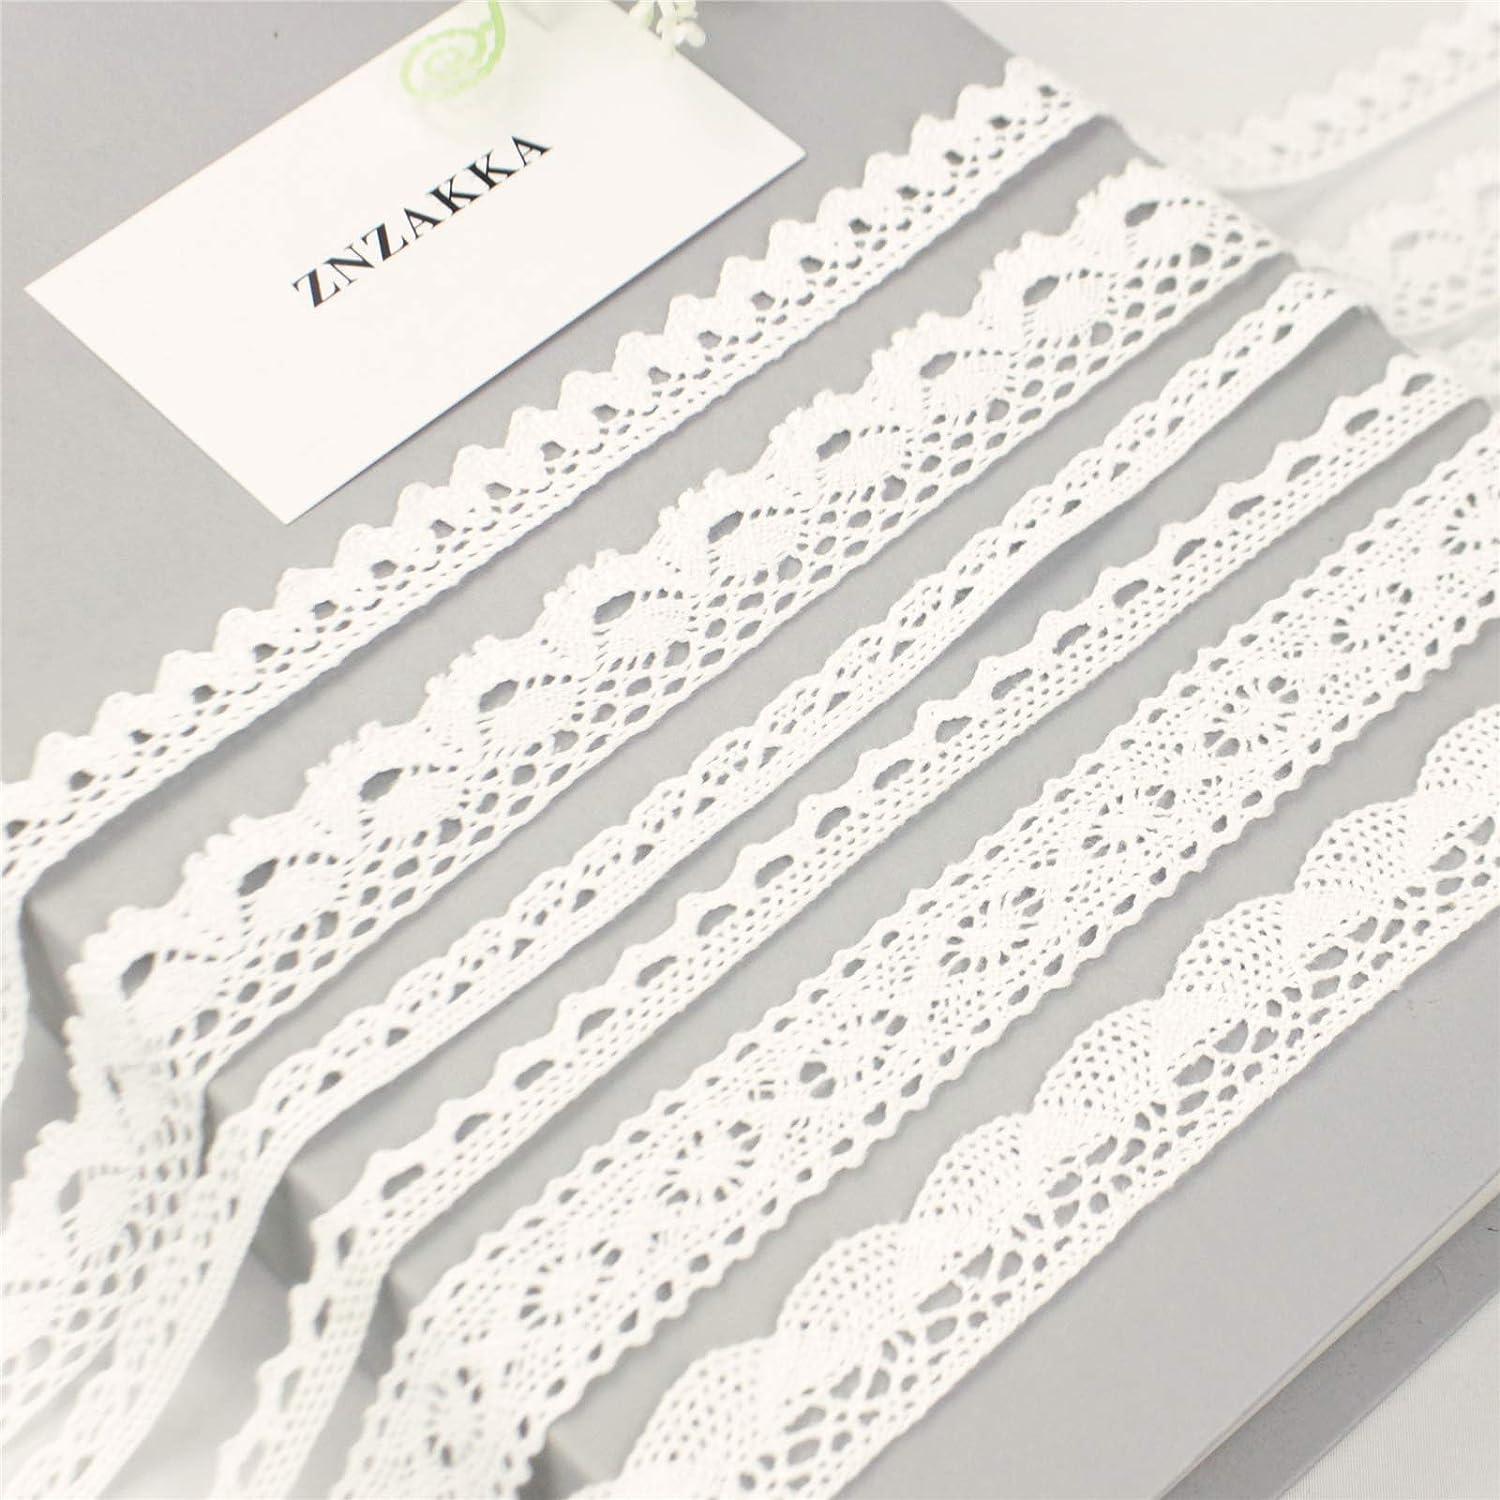 5Yards Cotton Lace Ribbon Crocheted Fabric Trim Sewing Garment Craft  Accessories - Simpson Advanced Chiropractic & Medical Center